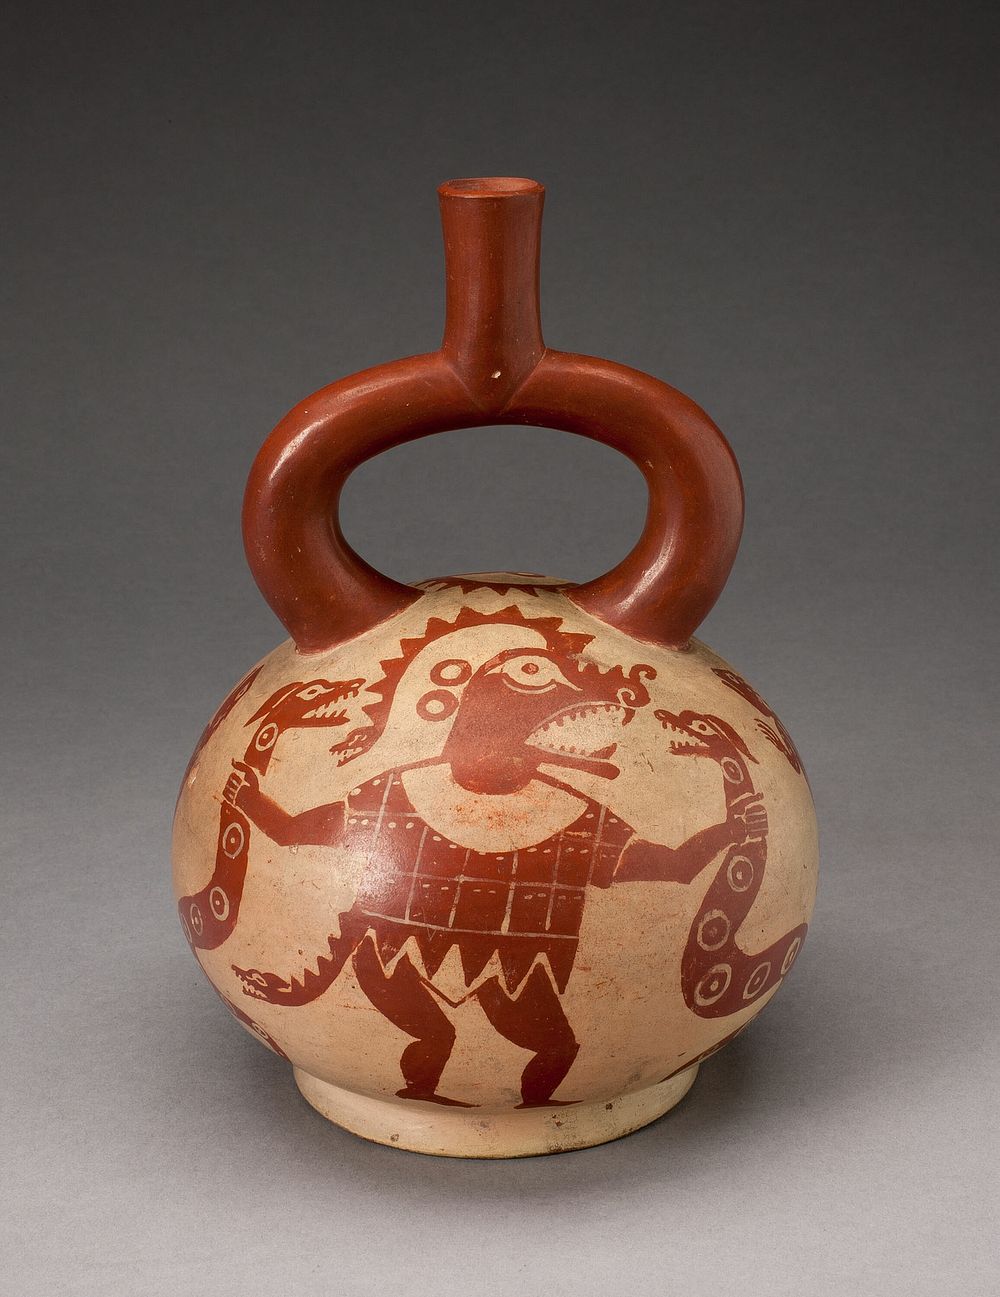 Ritual Vessel Depicting a Masked Deity with Serpents by Moche